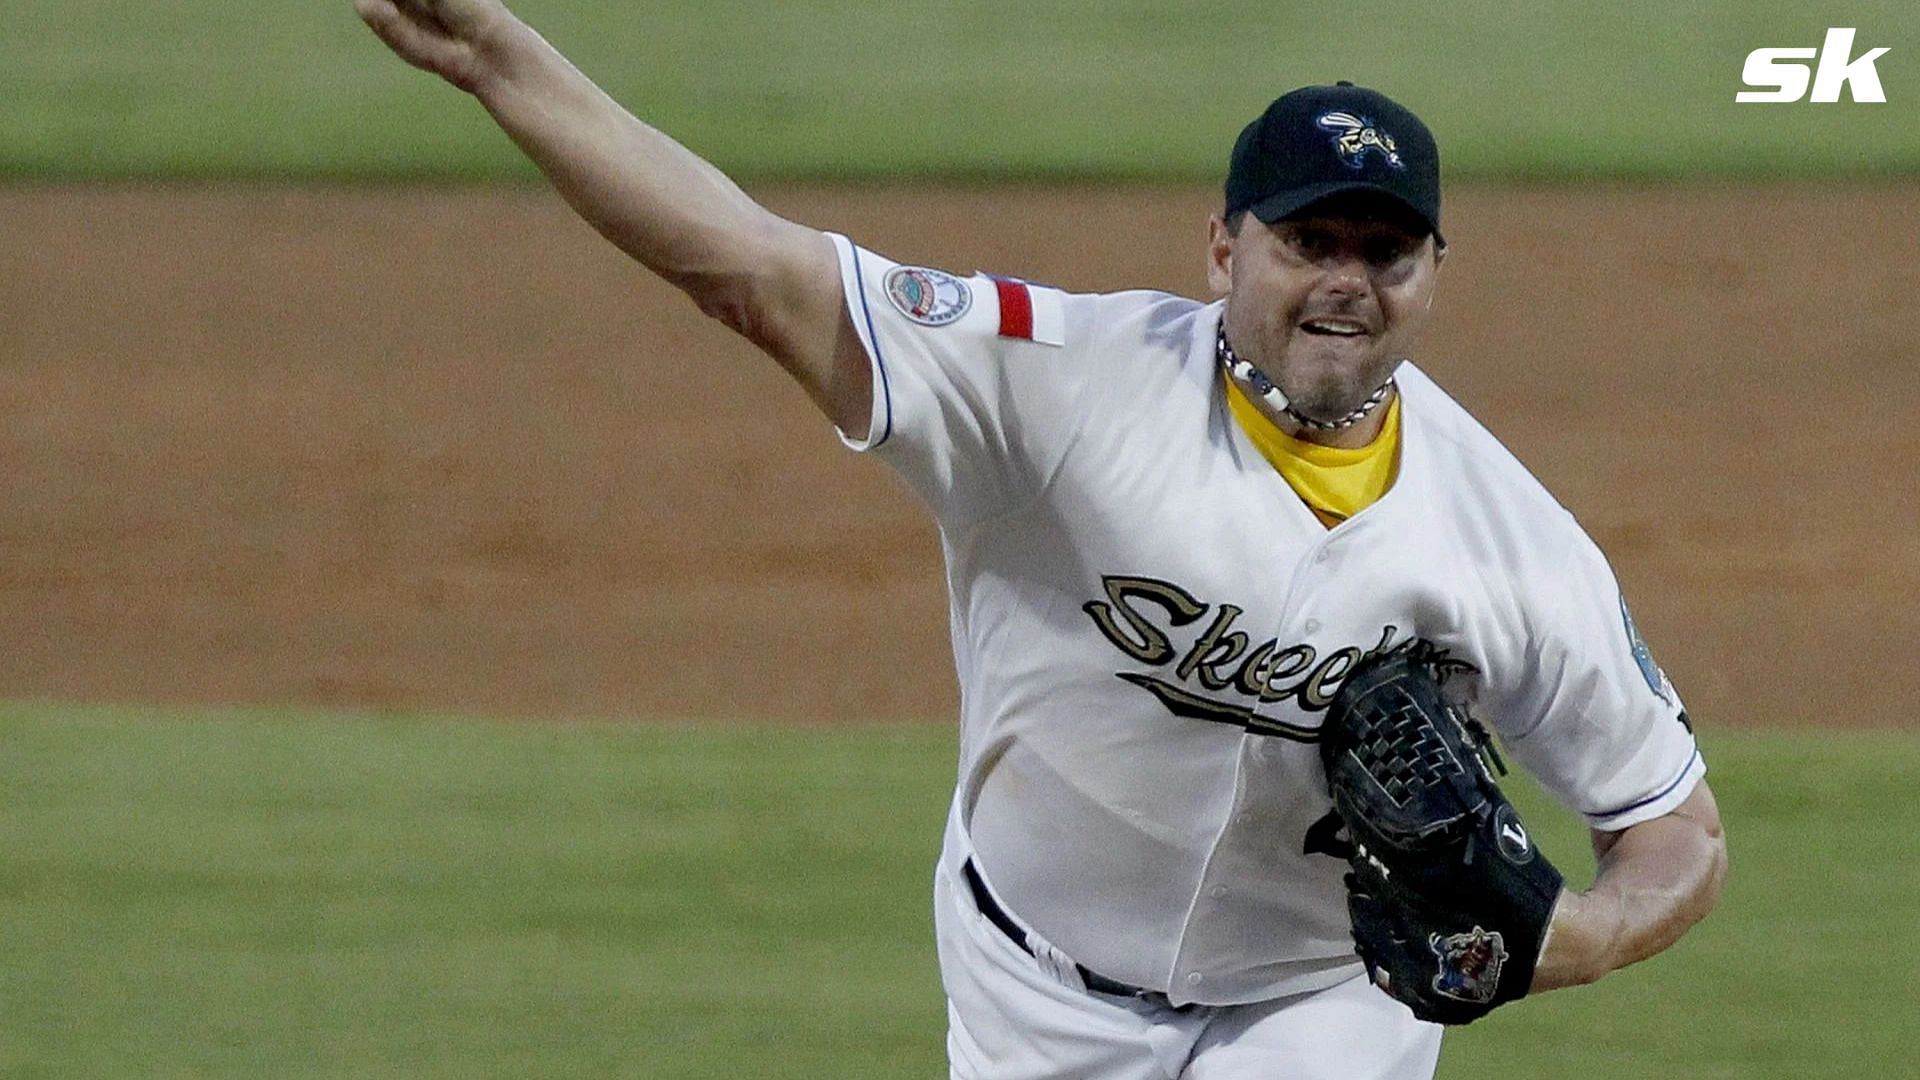 Not in Hall of Fame - 2. Roger Clemens